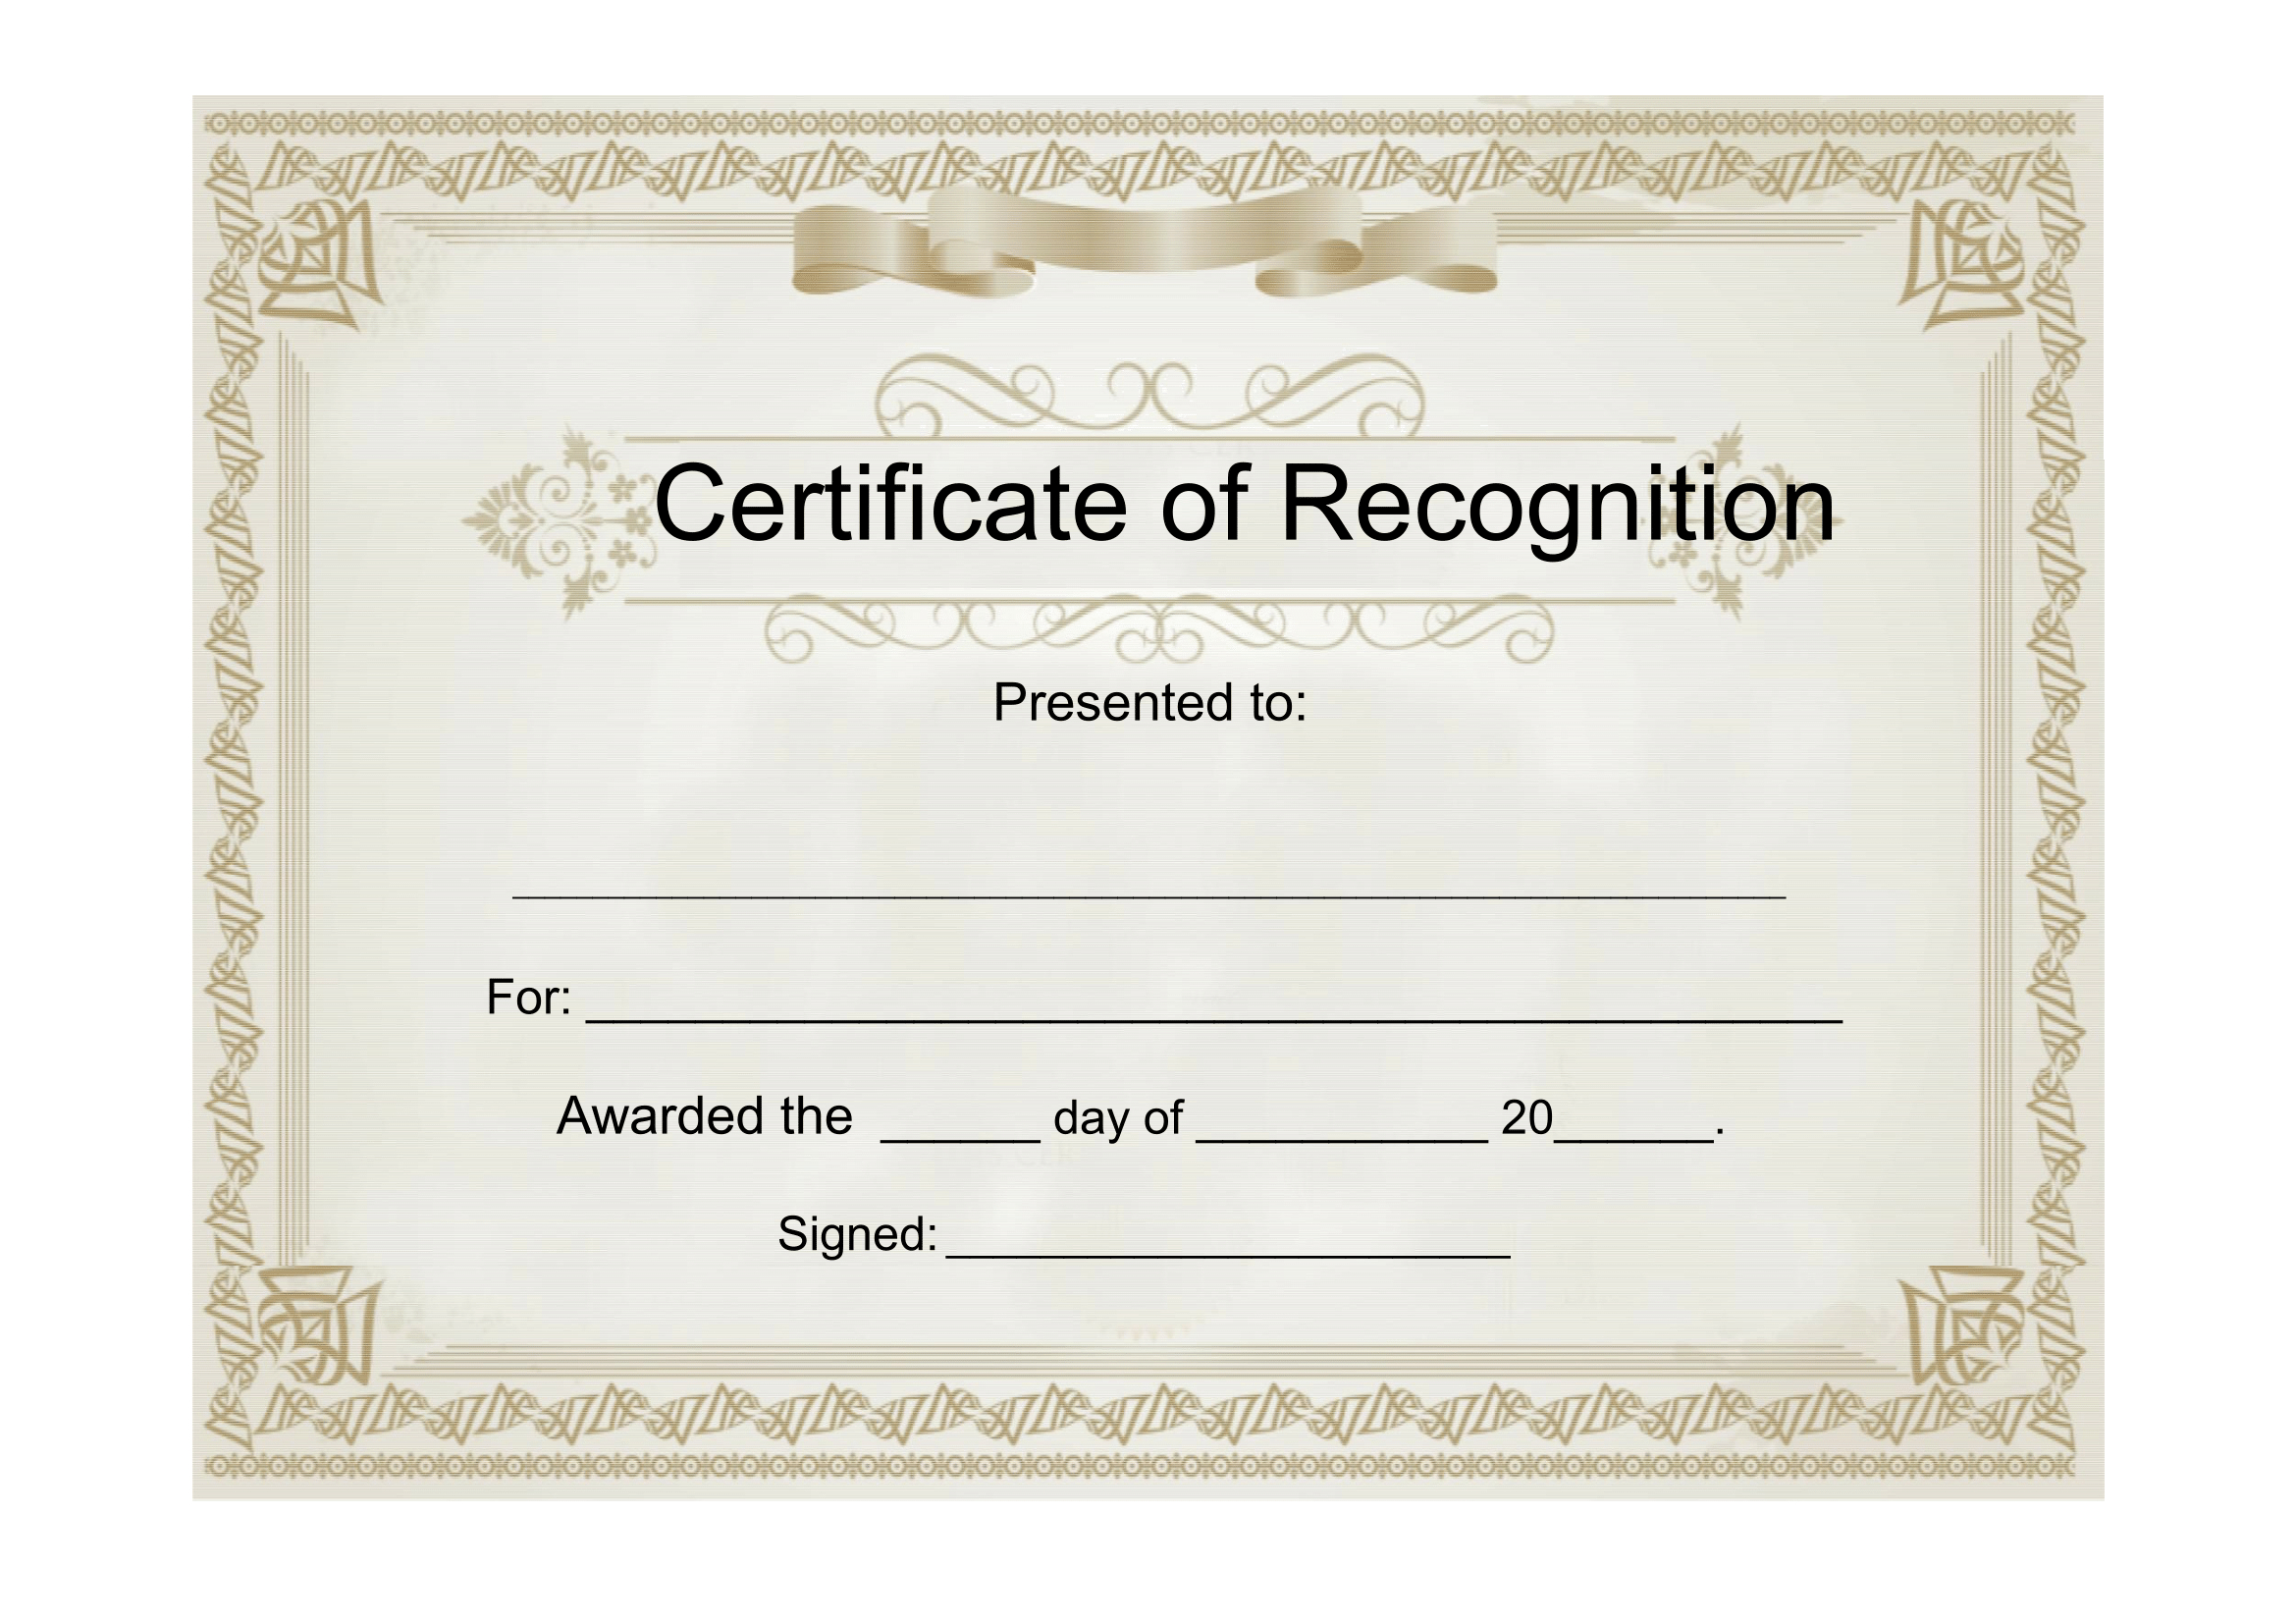 Sample Certificate Of Recognition – Free Download Template Within Free Template For Certificate Of Recognition